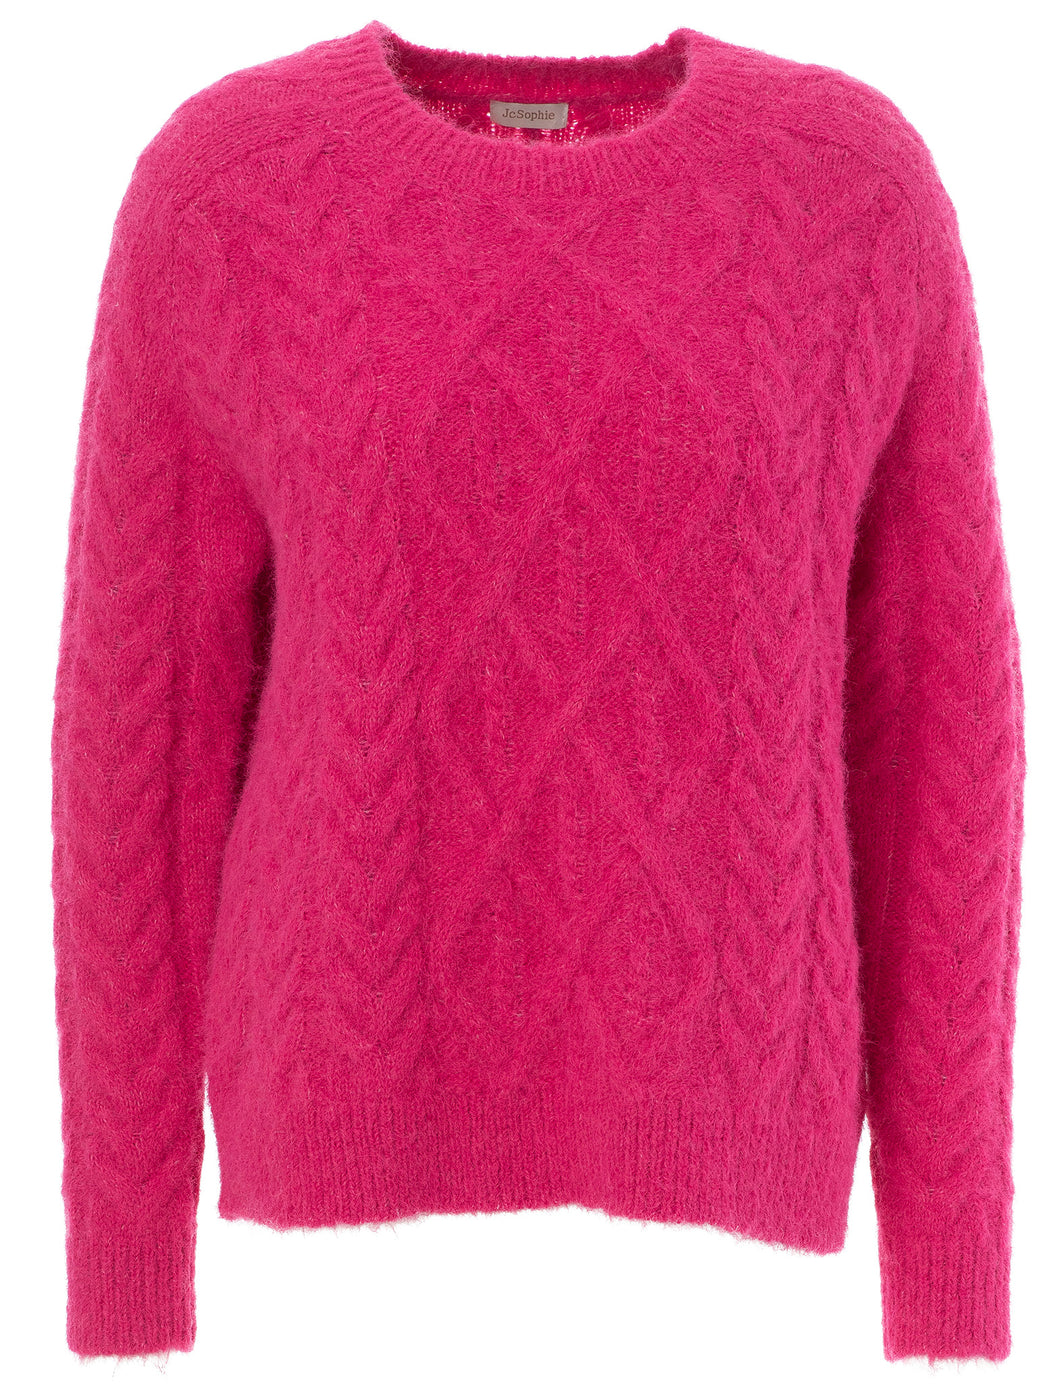 Amica Sweater By JcSophie!